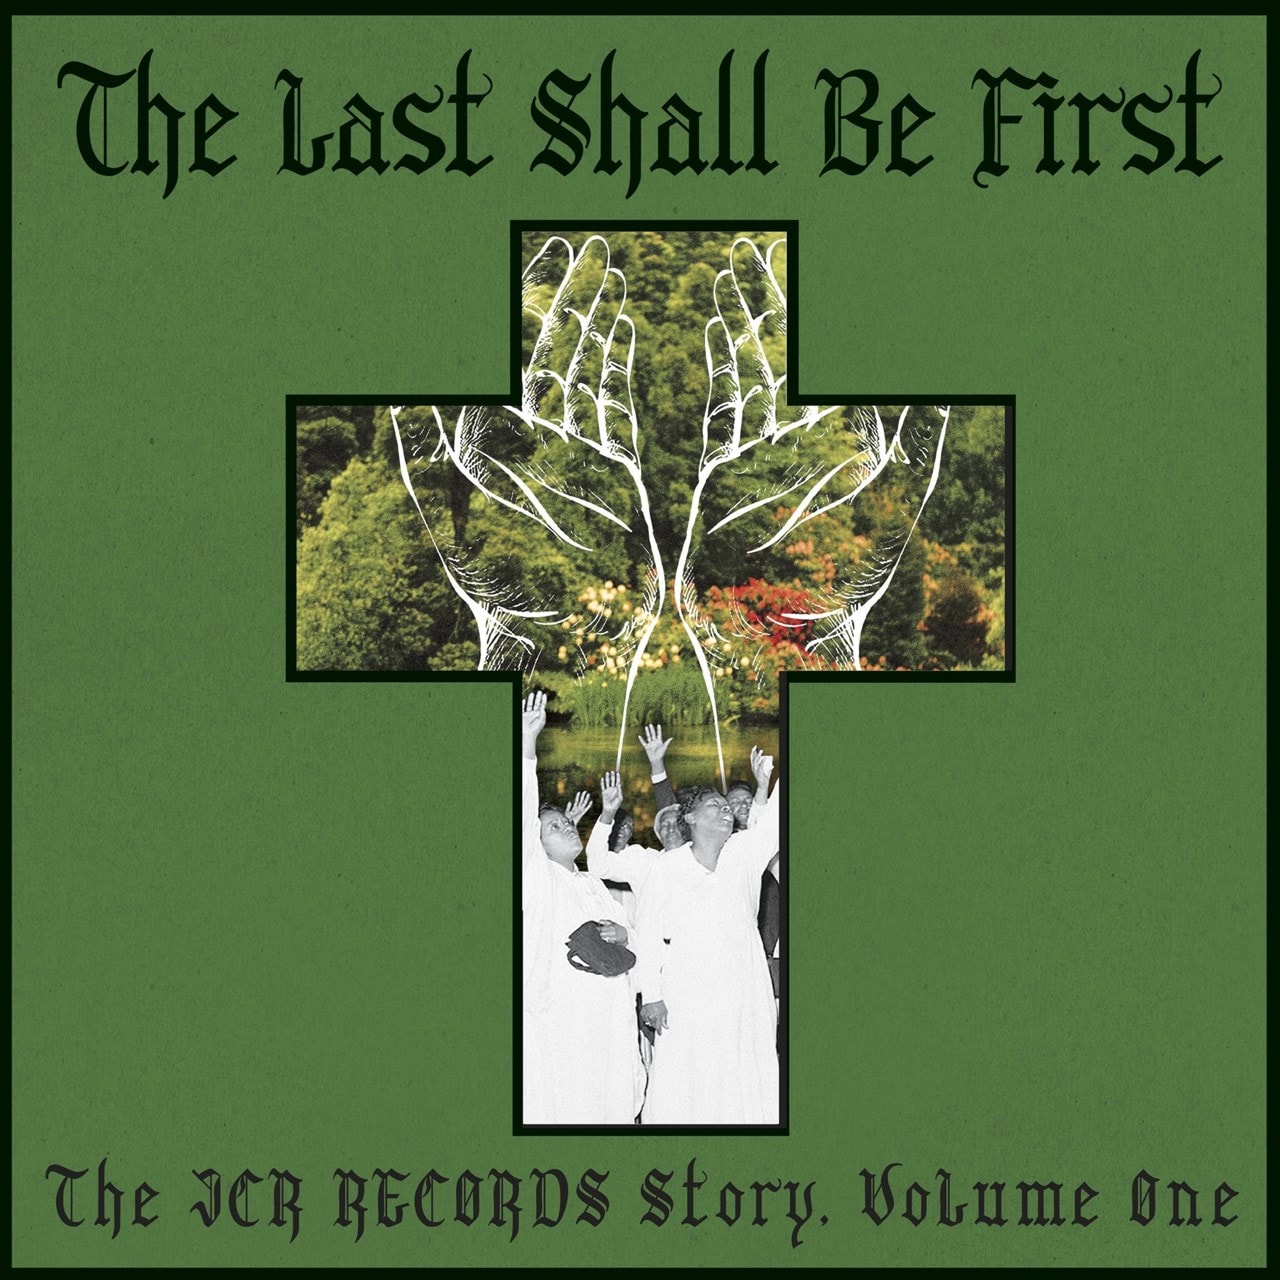 V/A "The Last Shall Be The First: The JCR Records Story" LP